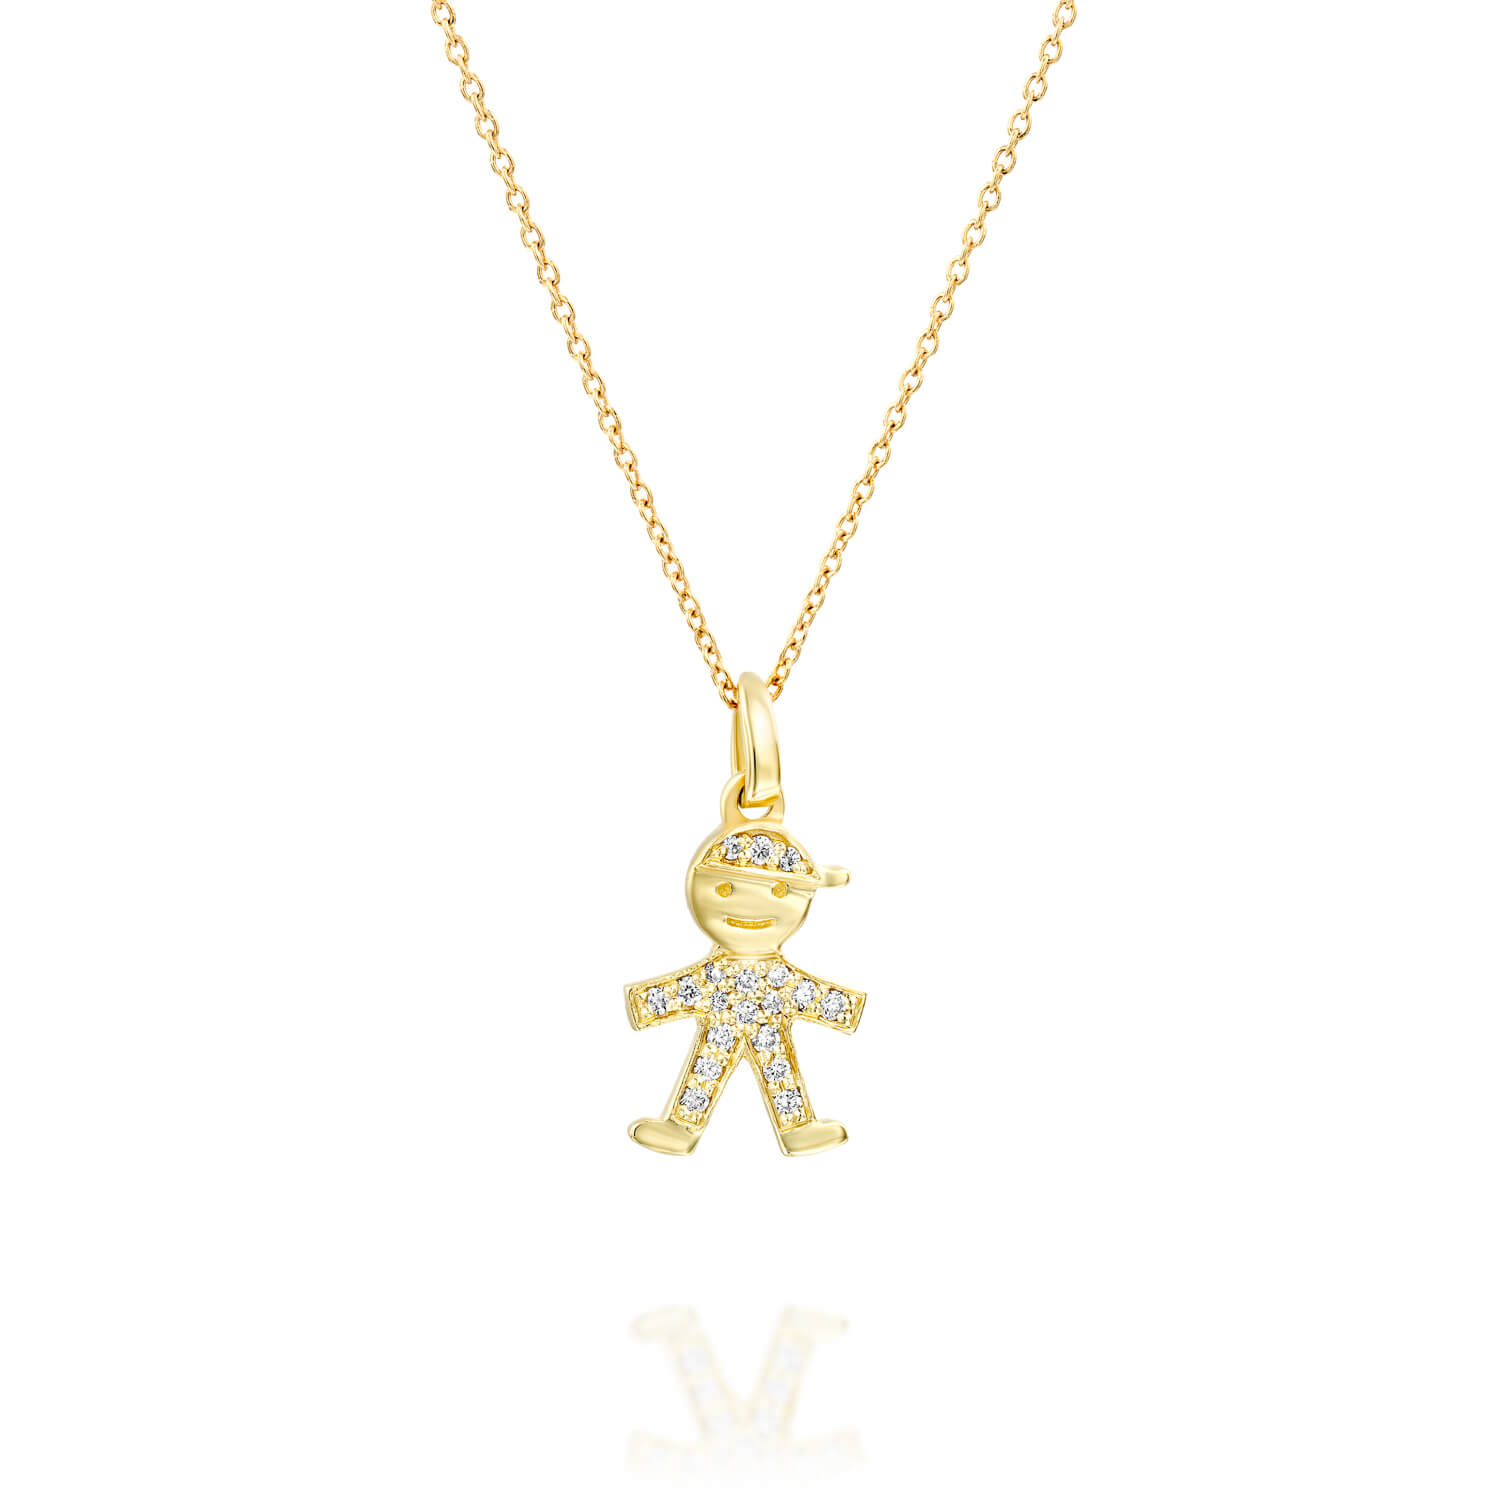 14K Yellow Gold Textured Boy Pendant Charm Necklace Baby: 16466570936371